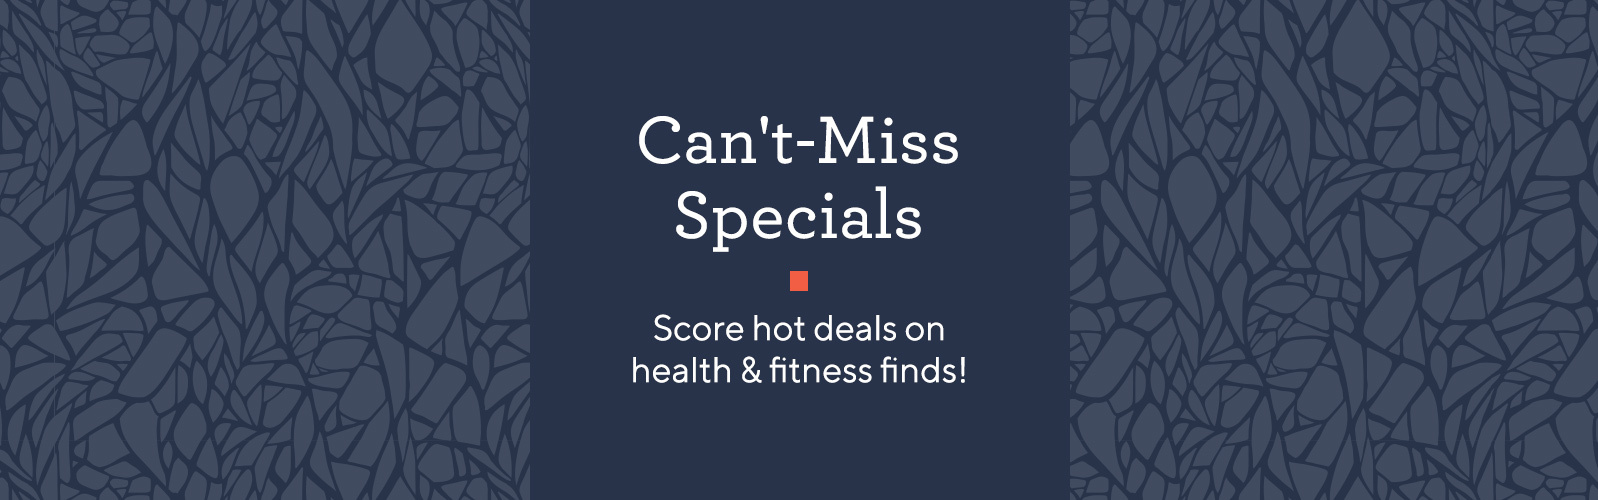 Can't-Miss Specials.  Score hot deals on health & fitness finds!